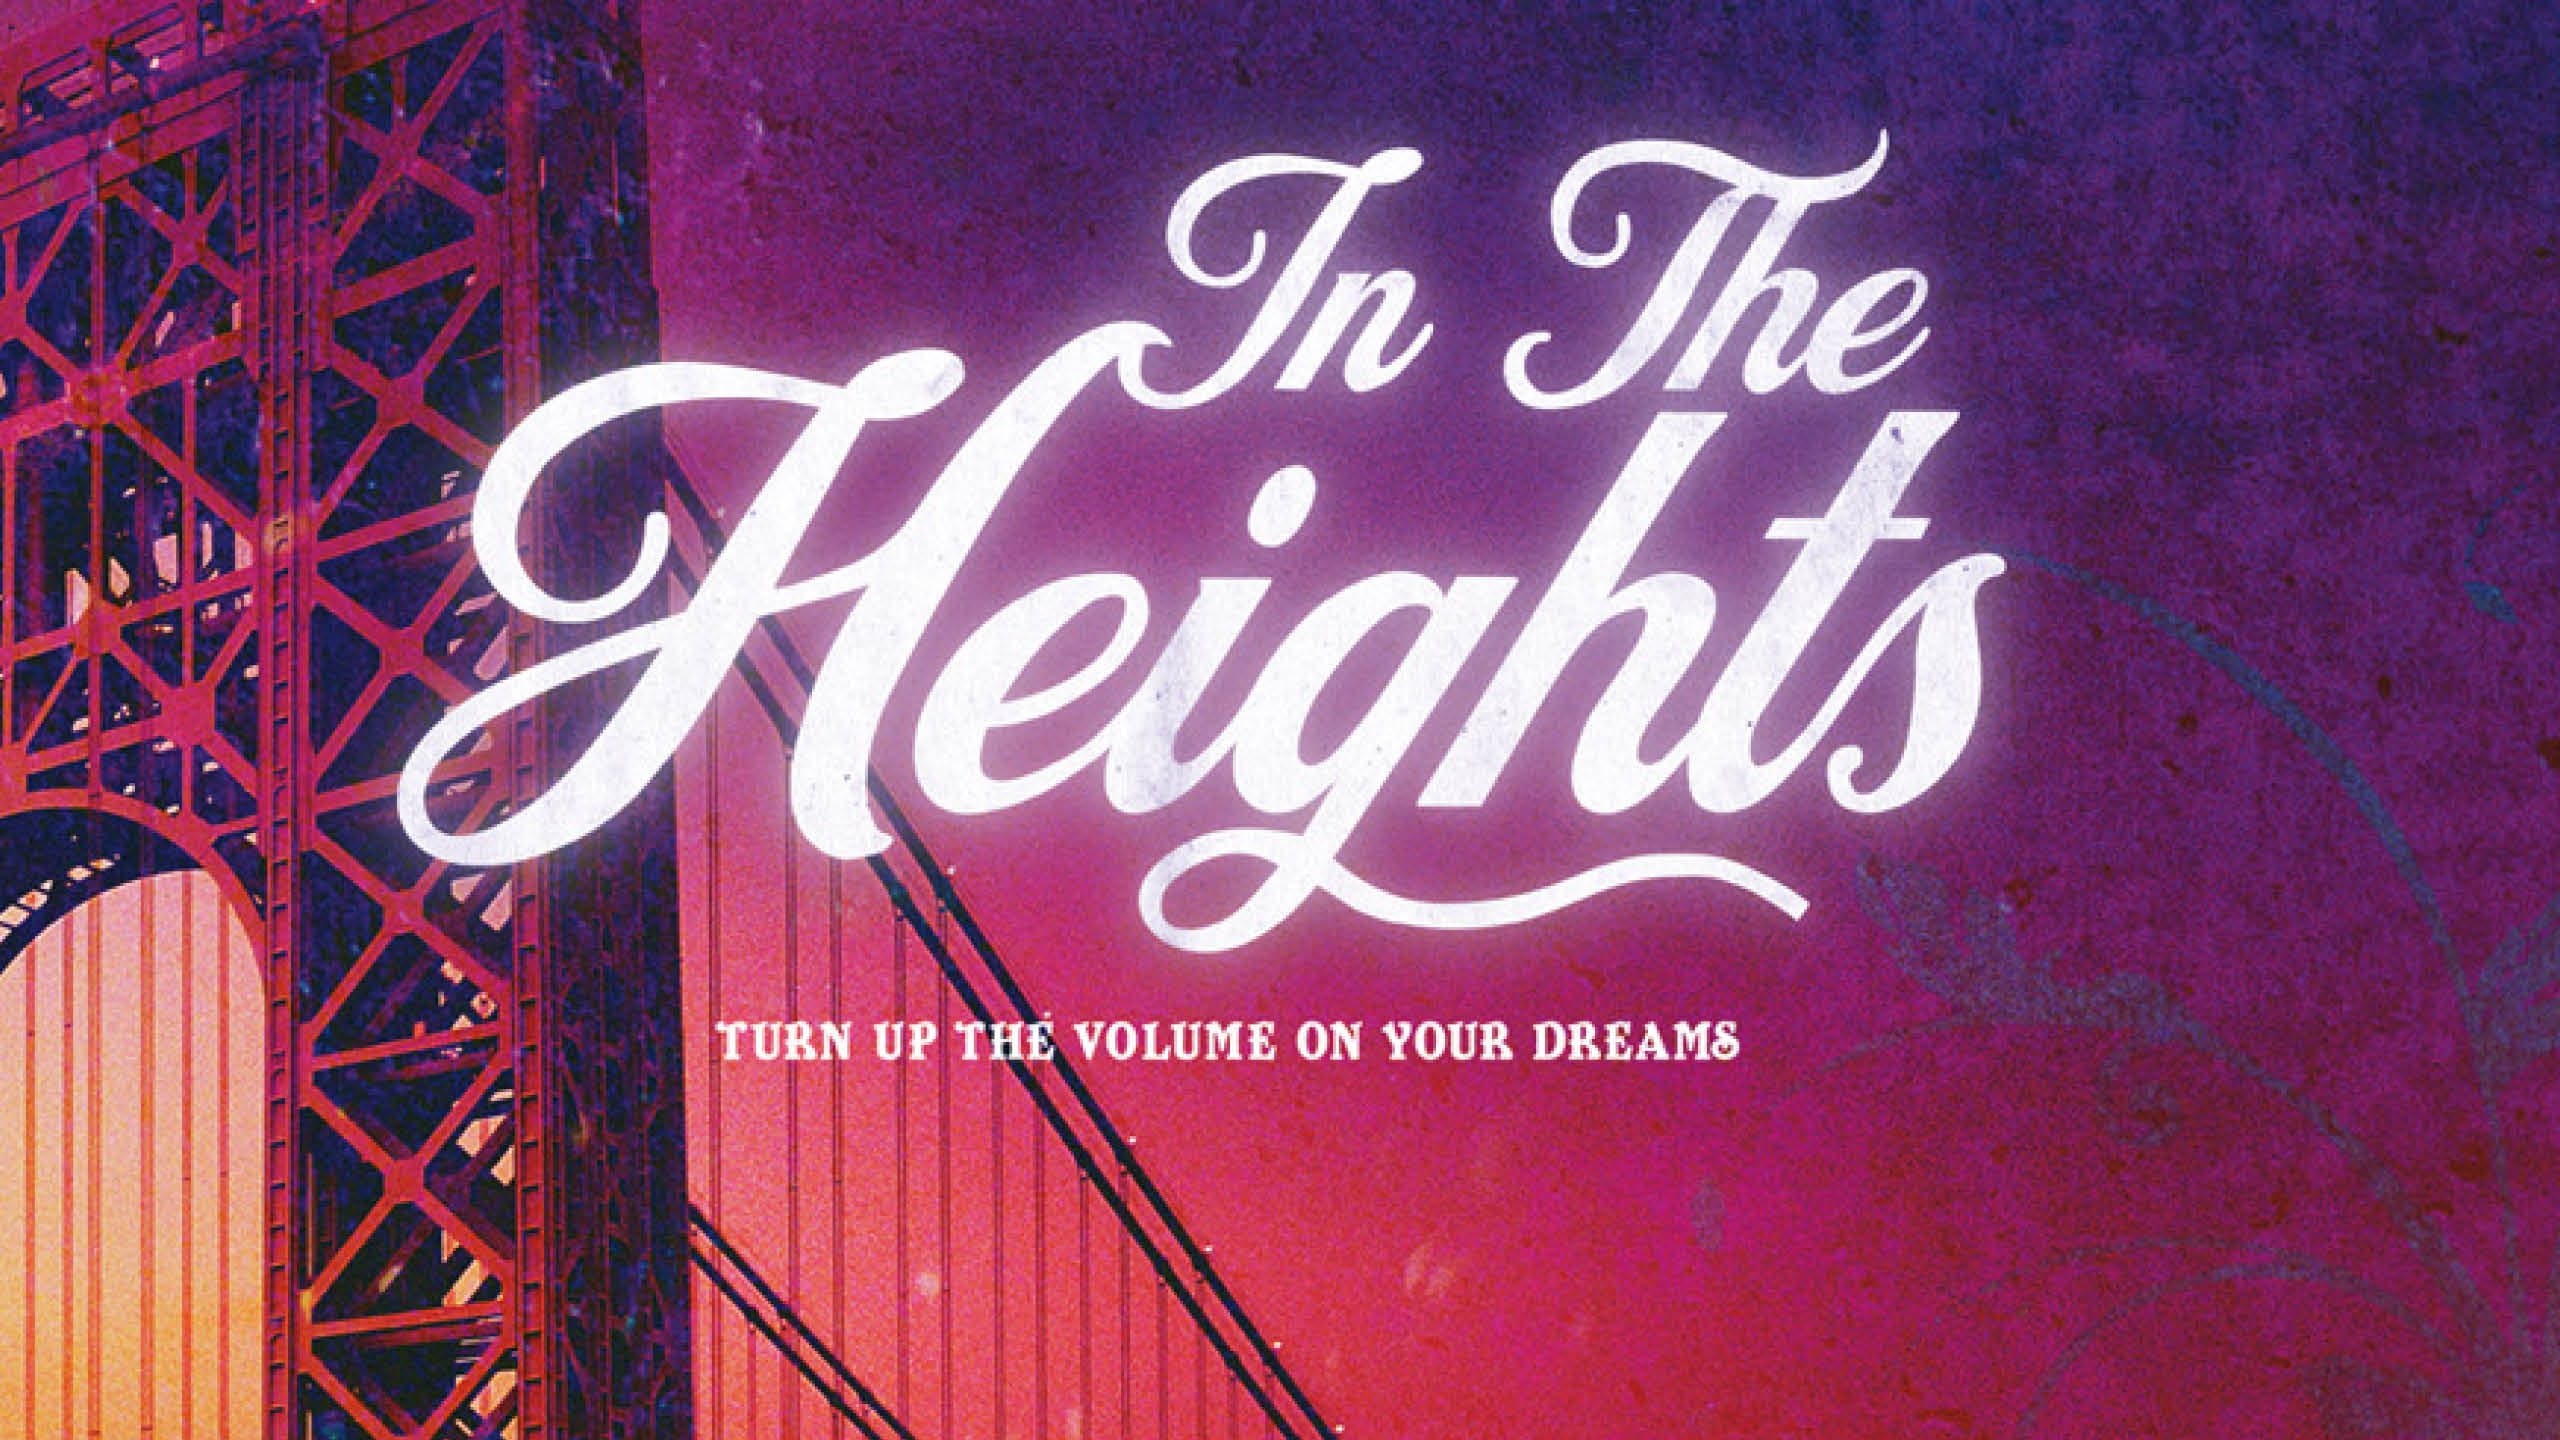 Image of In The Heights branding with Brooklyn bridge in background